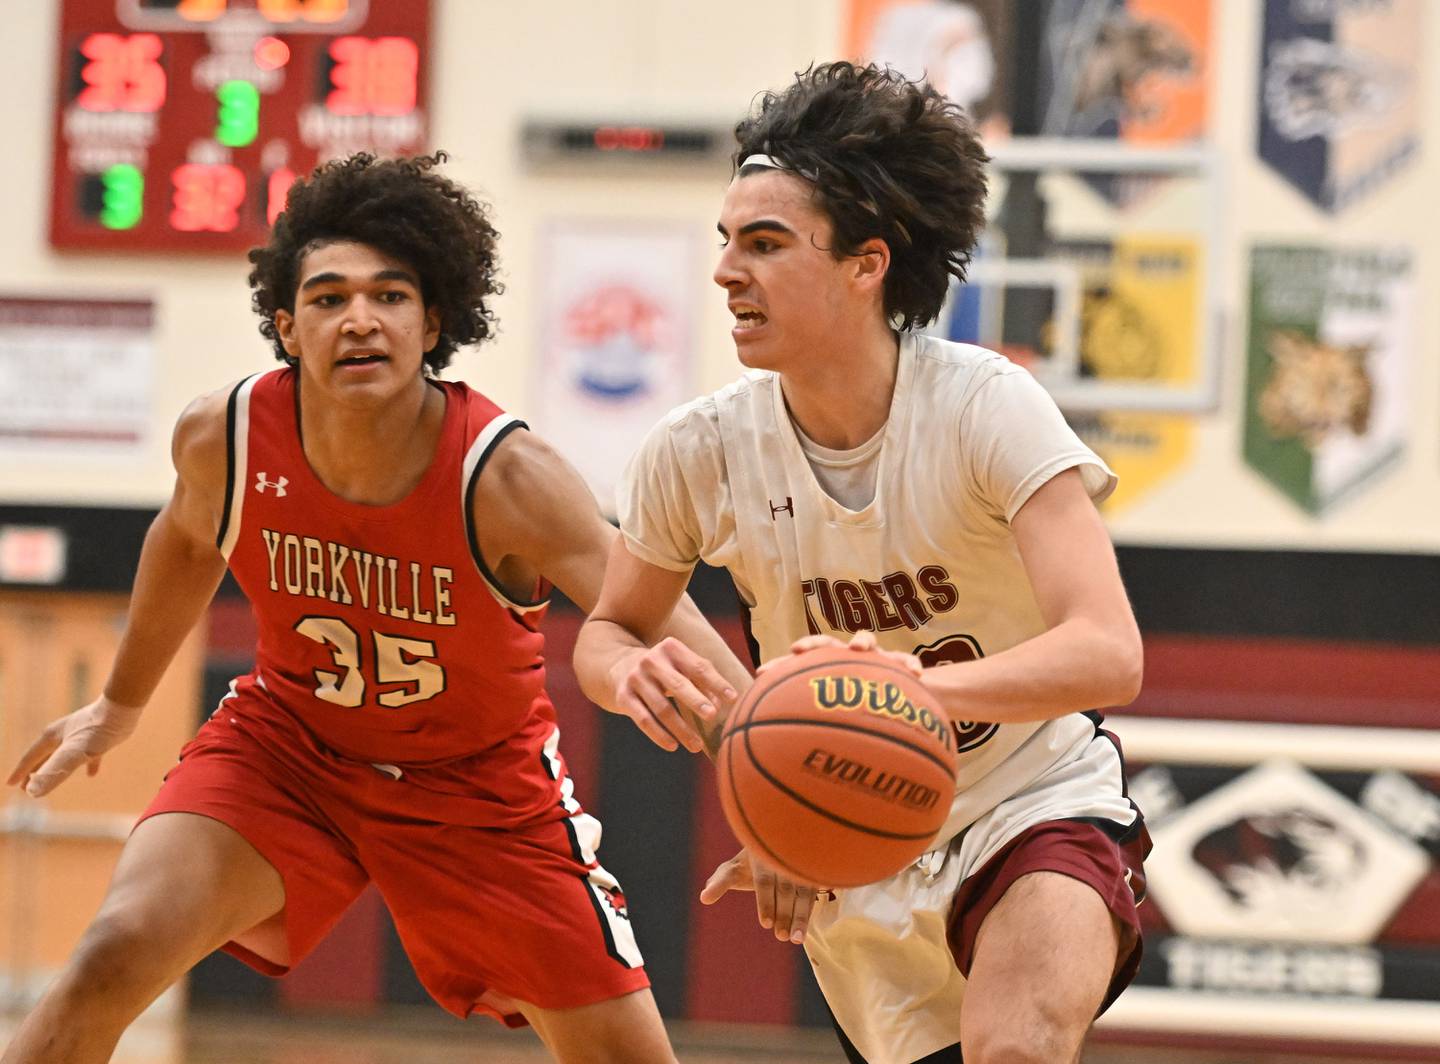 Plainfield North's Jeffrey Fleming drives to the basket against Yorkville on Friday, Jan. 27, 2023, at Plainfield.